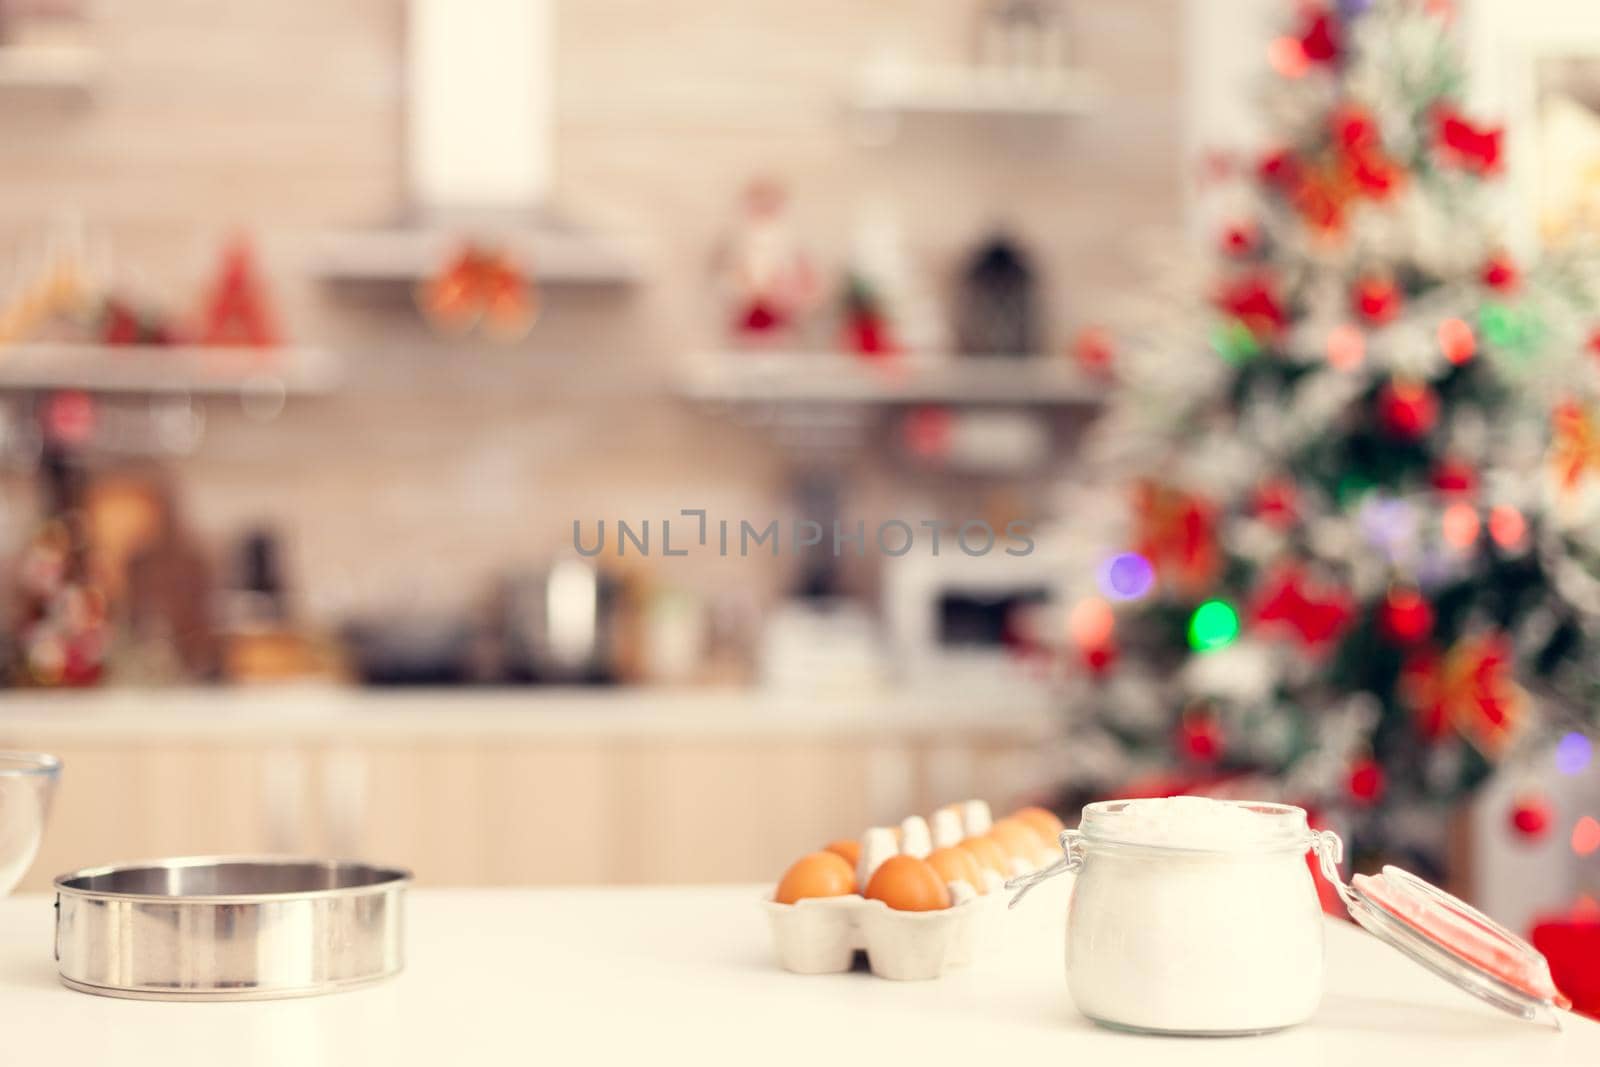 Ingredients for preparation of delicious cookies on table in empty room. Kitchen on christmas day with nobody in the room decorated with x-mas tree and garlands